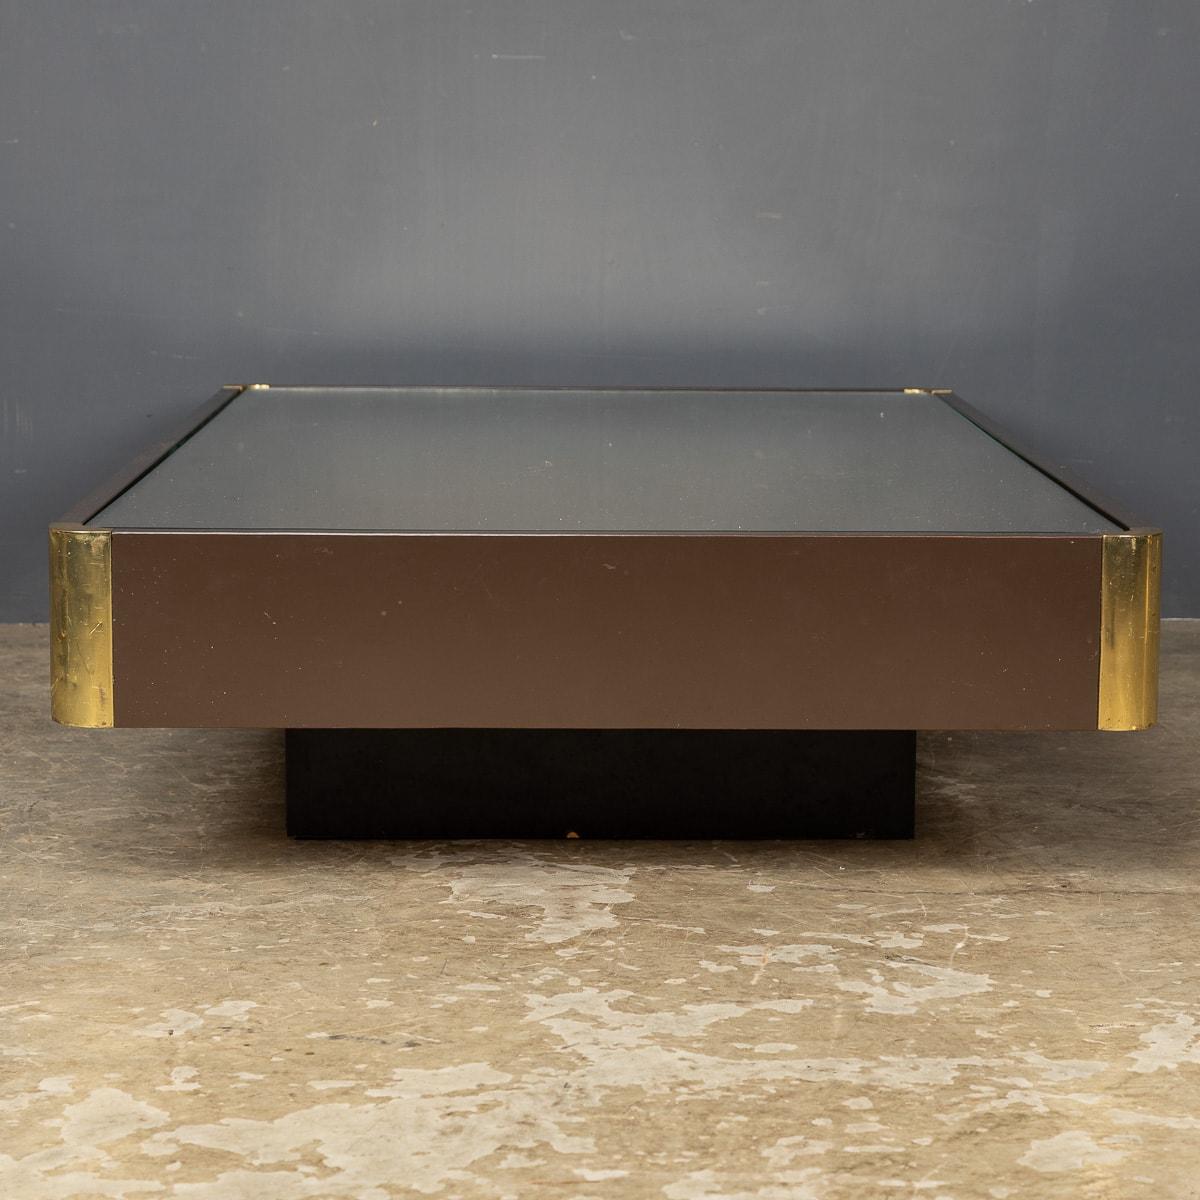 20th Century Italian Brass Top Coffee Table By Willy Rizzo, c.1970 For Sale 3